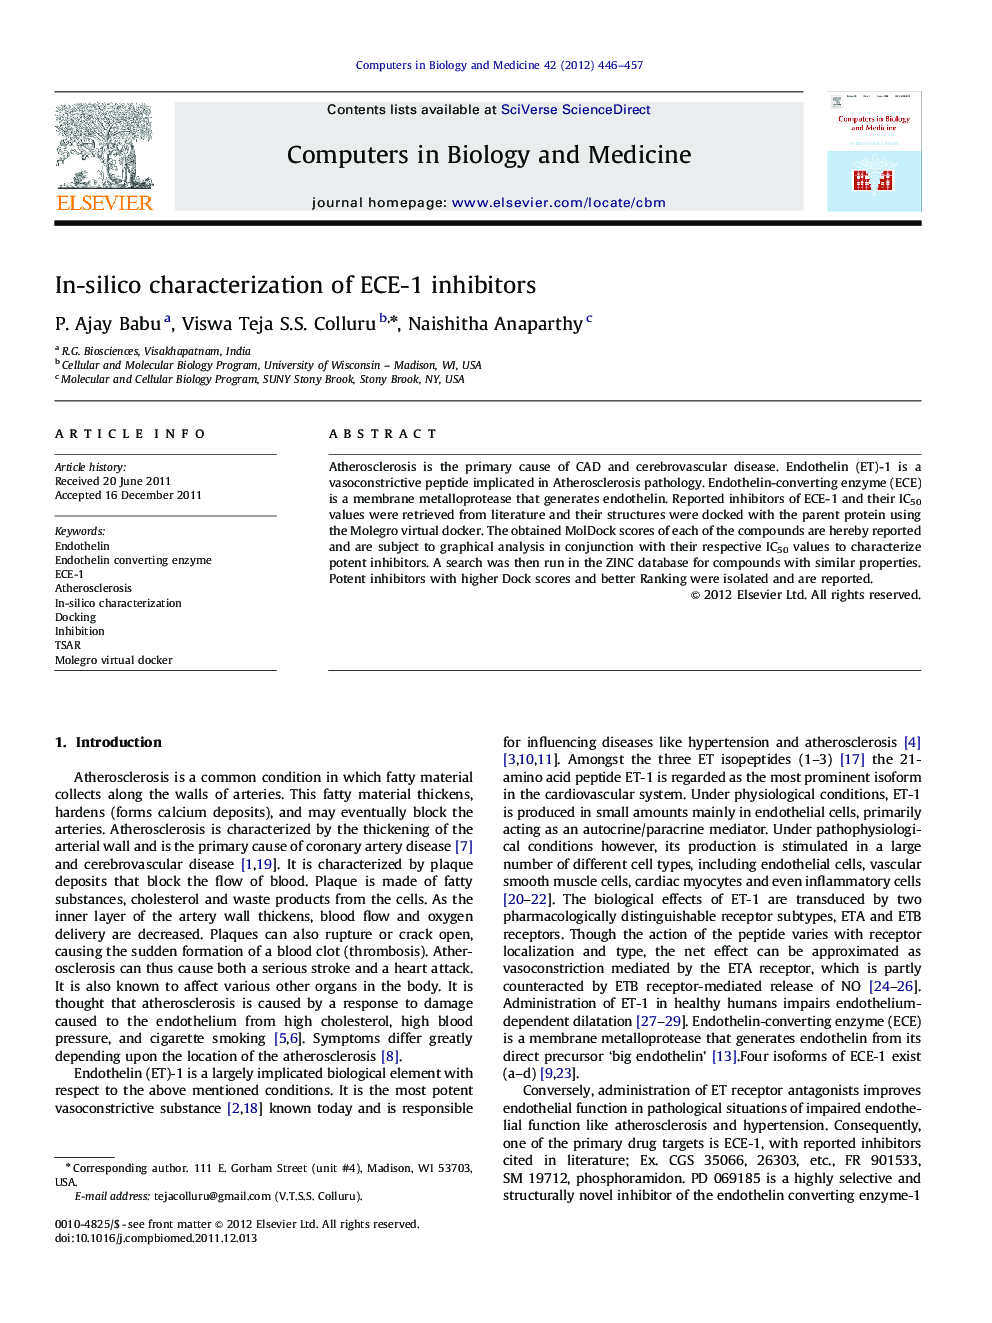 In-silico characterization of ECE-1 inhibitors